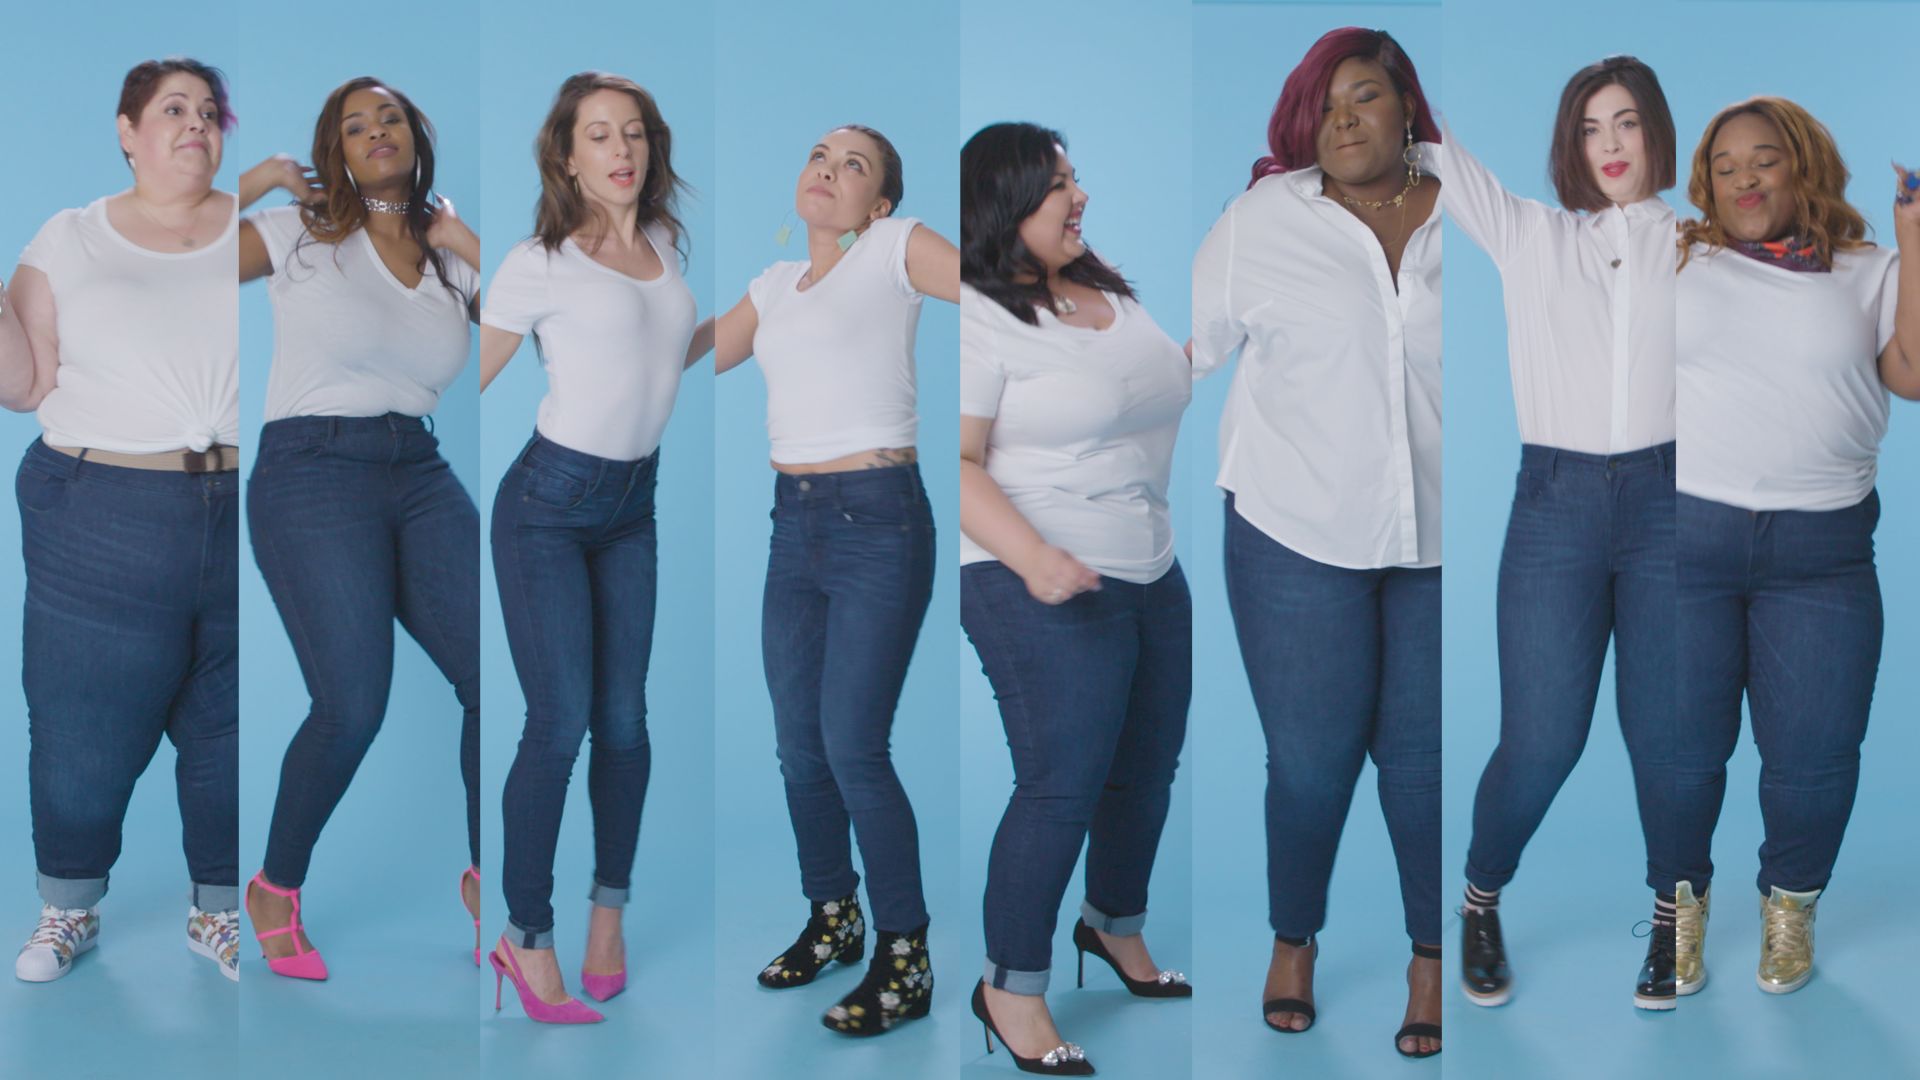 Watch Women Sizes 0 Through 28 Try on the Same Jeans